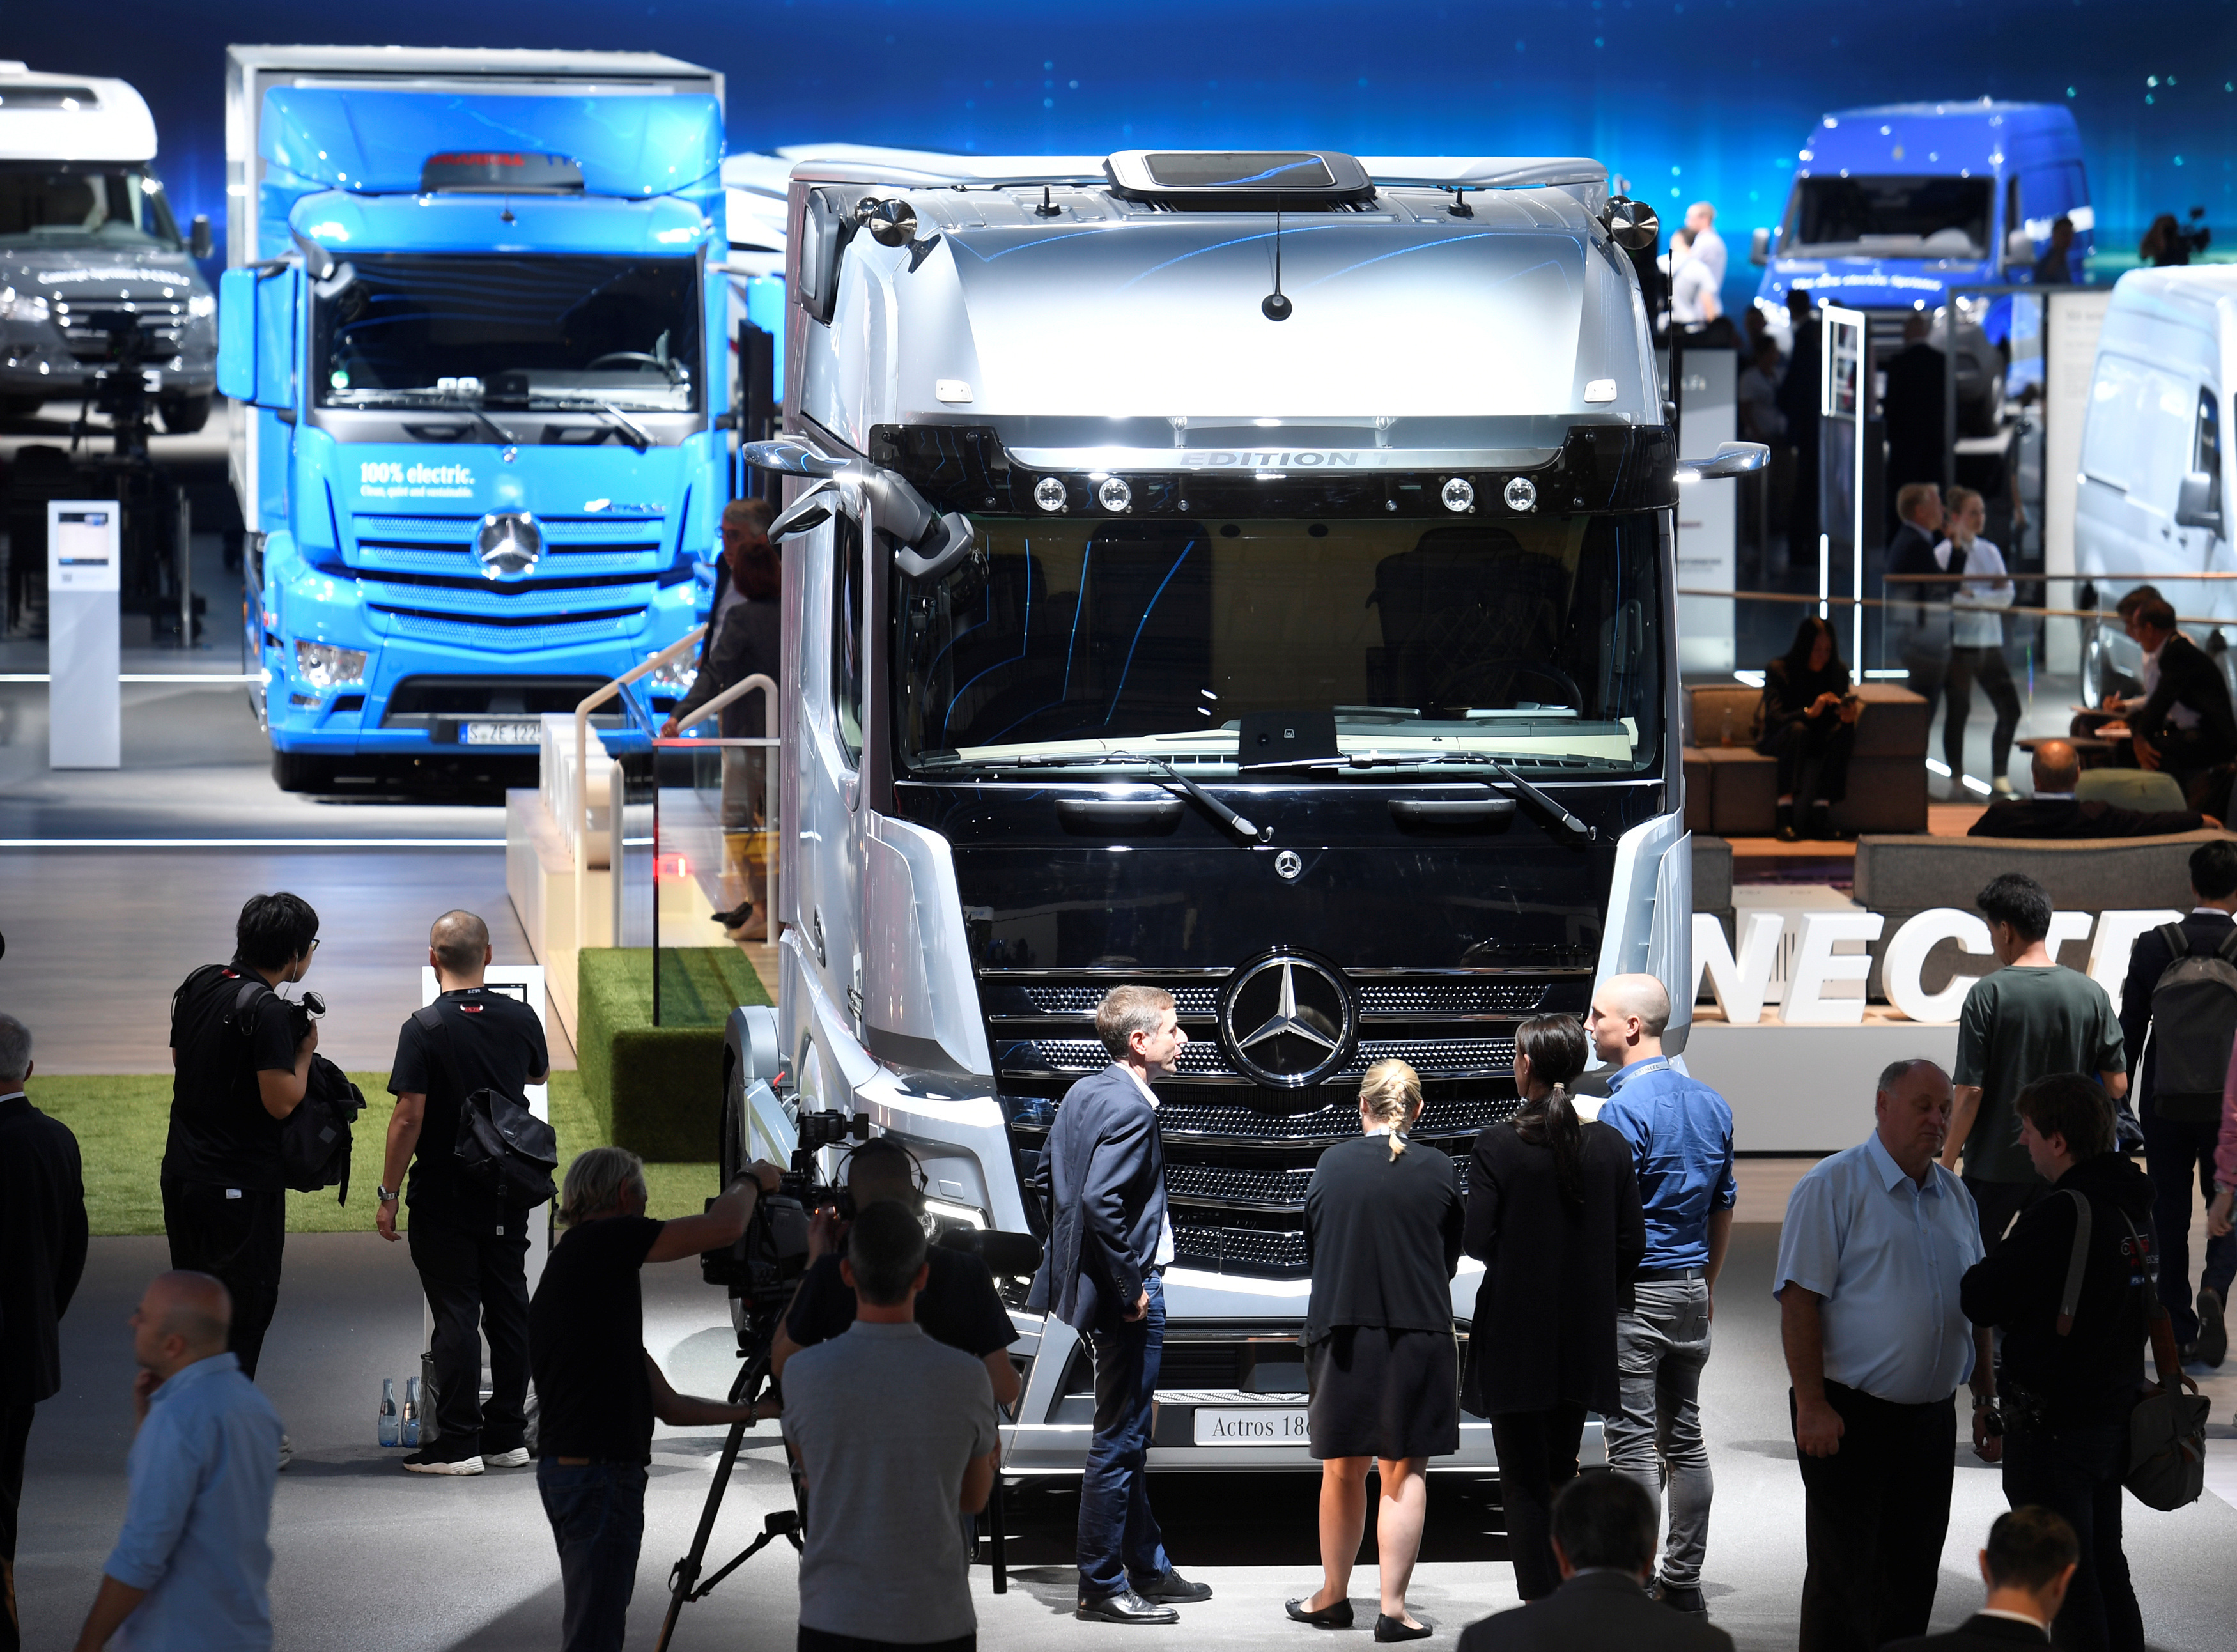 Visitors surround an Actros truck of German truck maker Mercedes-Benz at the IAA truck trade fair in Hanover